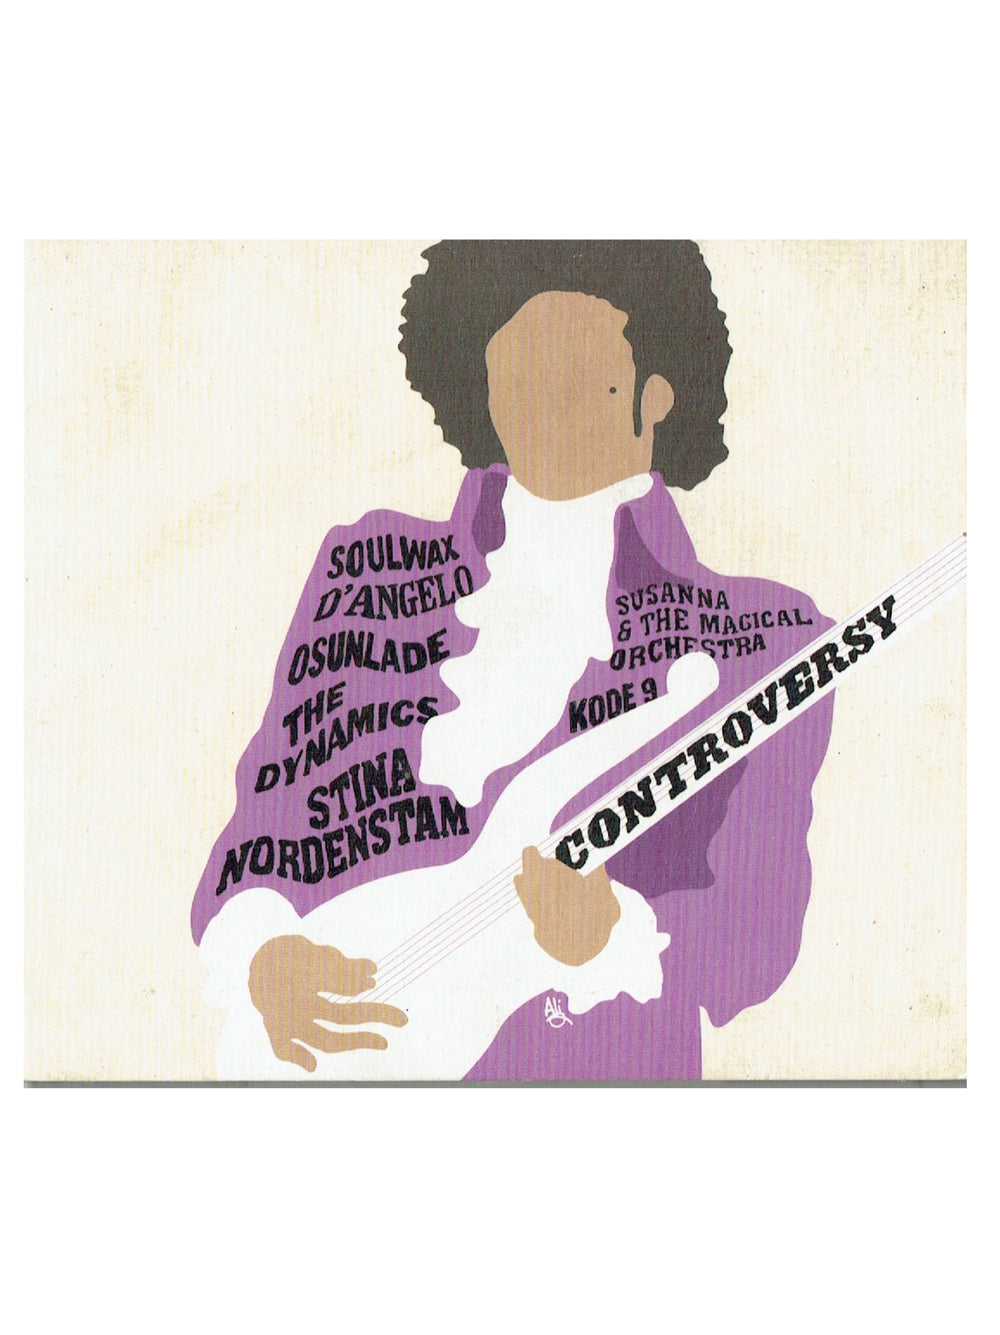 Controversy CD Album Various Cover Versions Prince